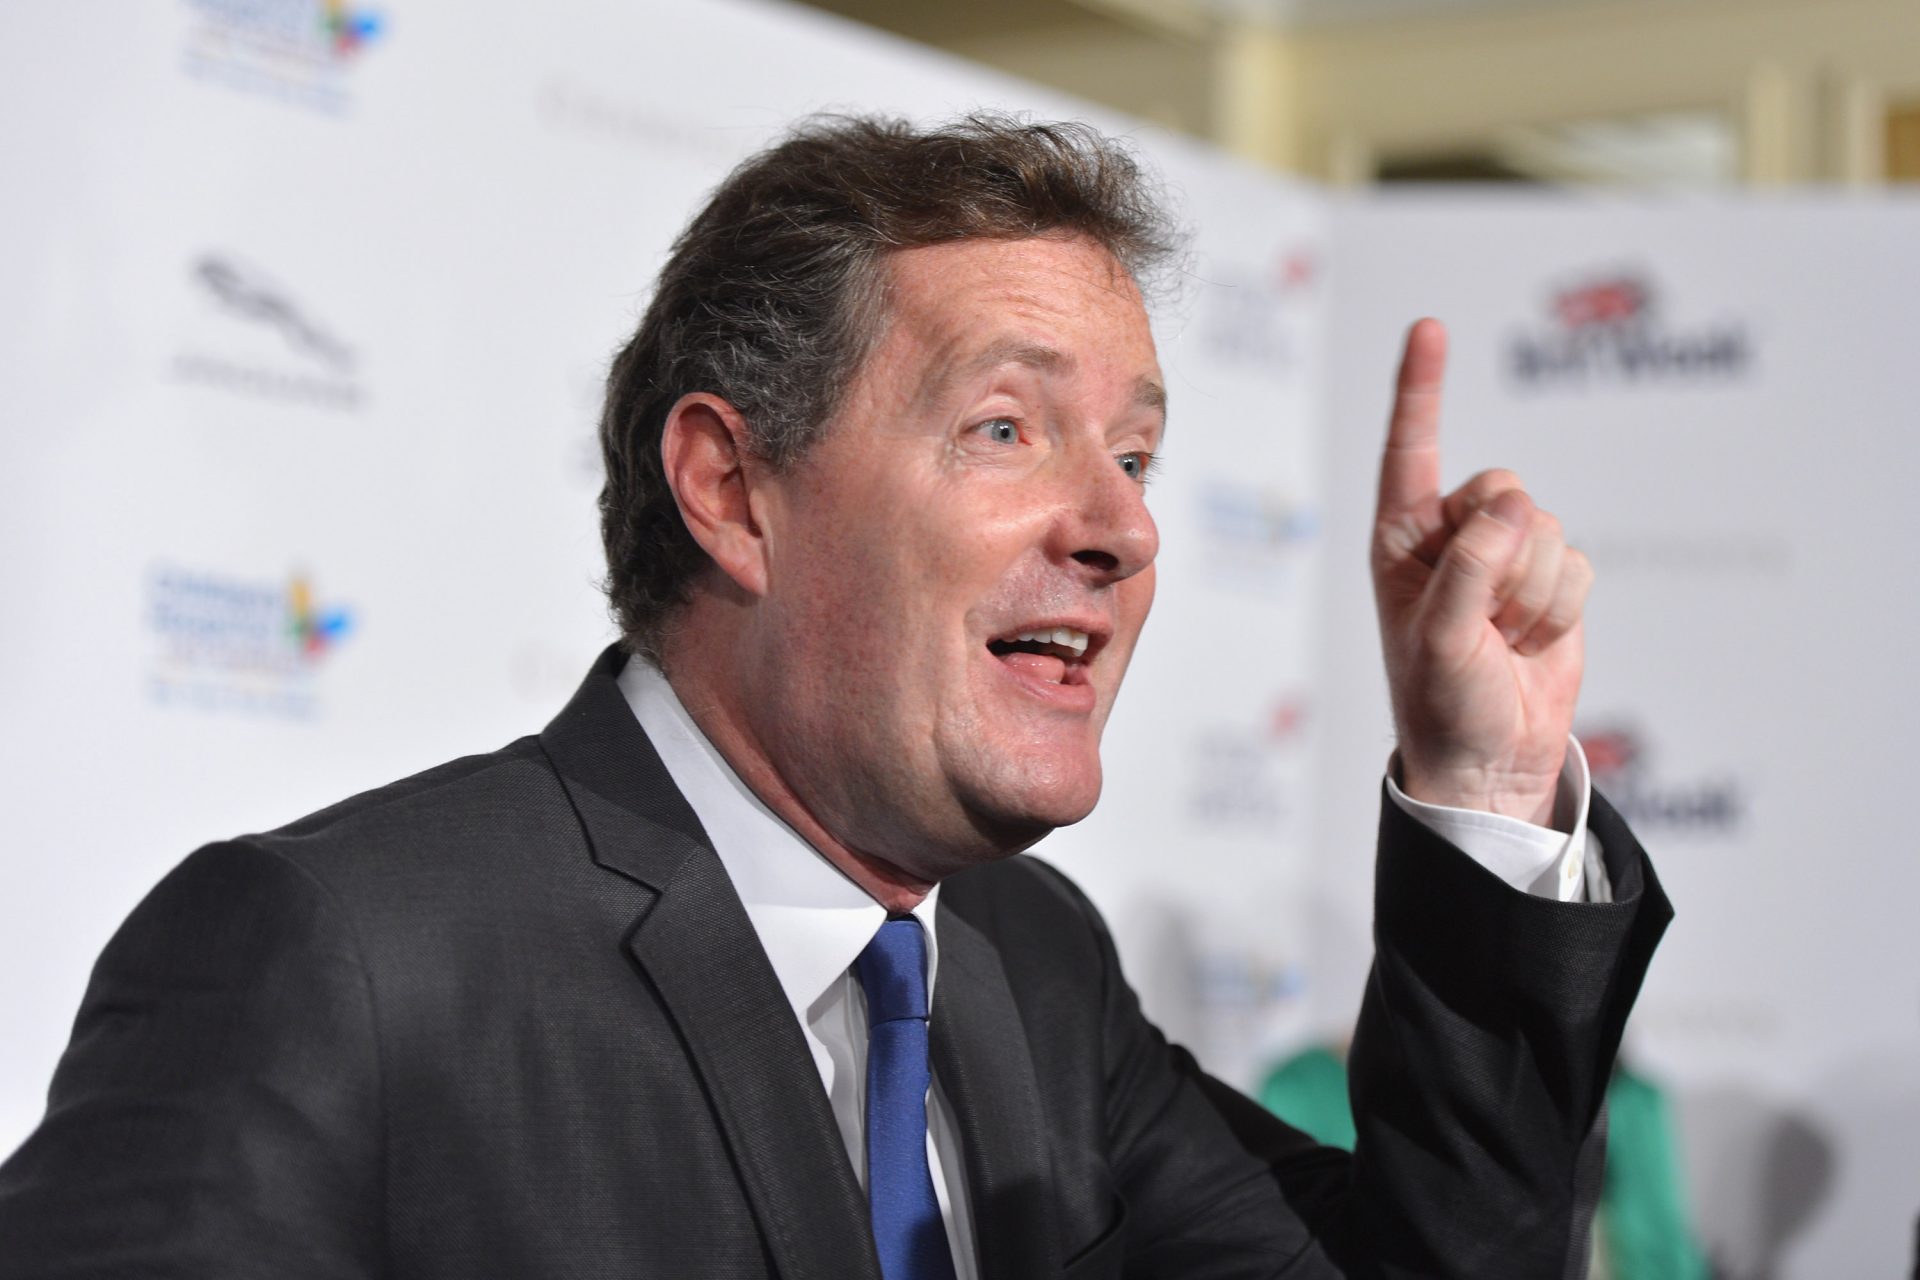 Is Piers Morgan going to calm down now?